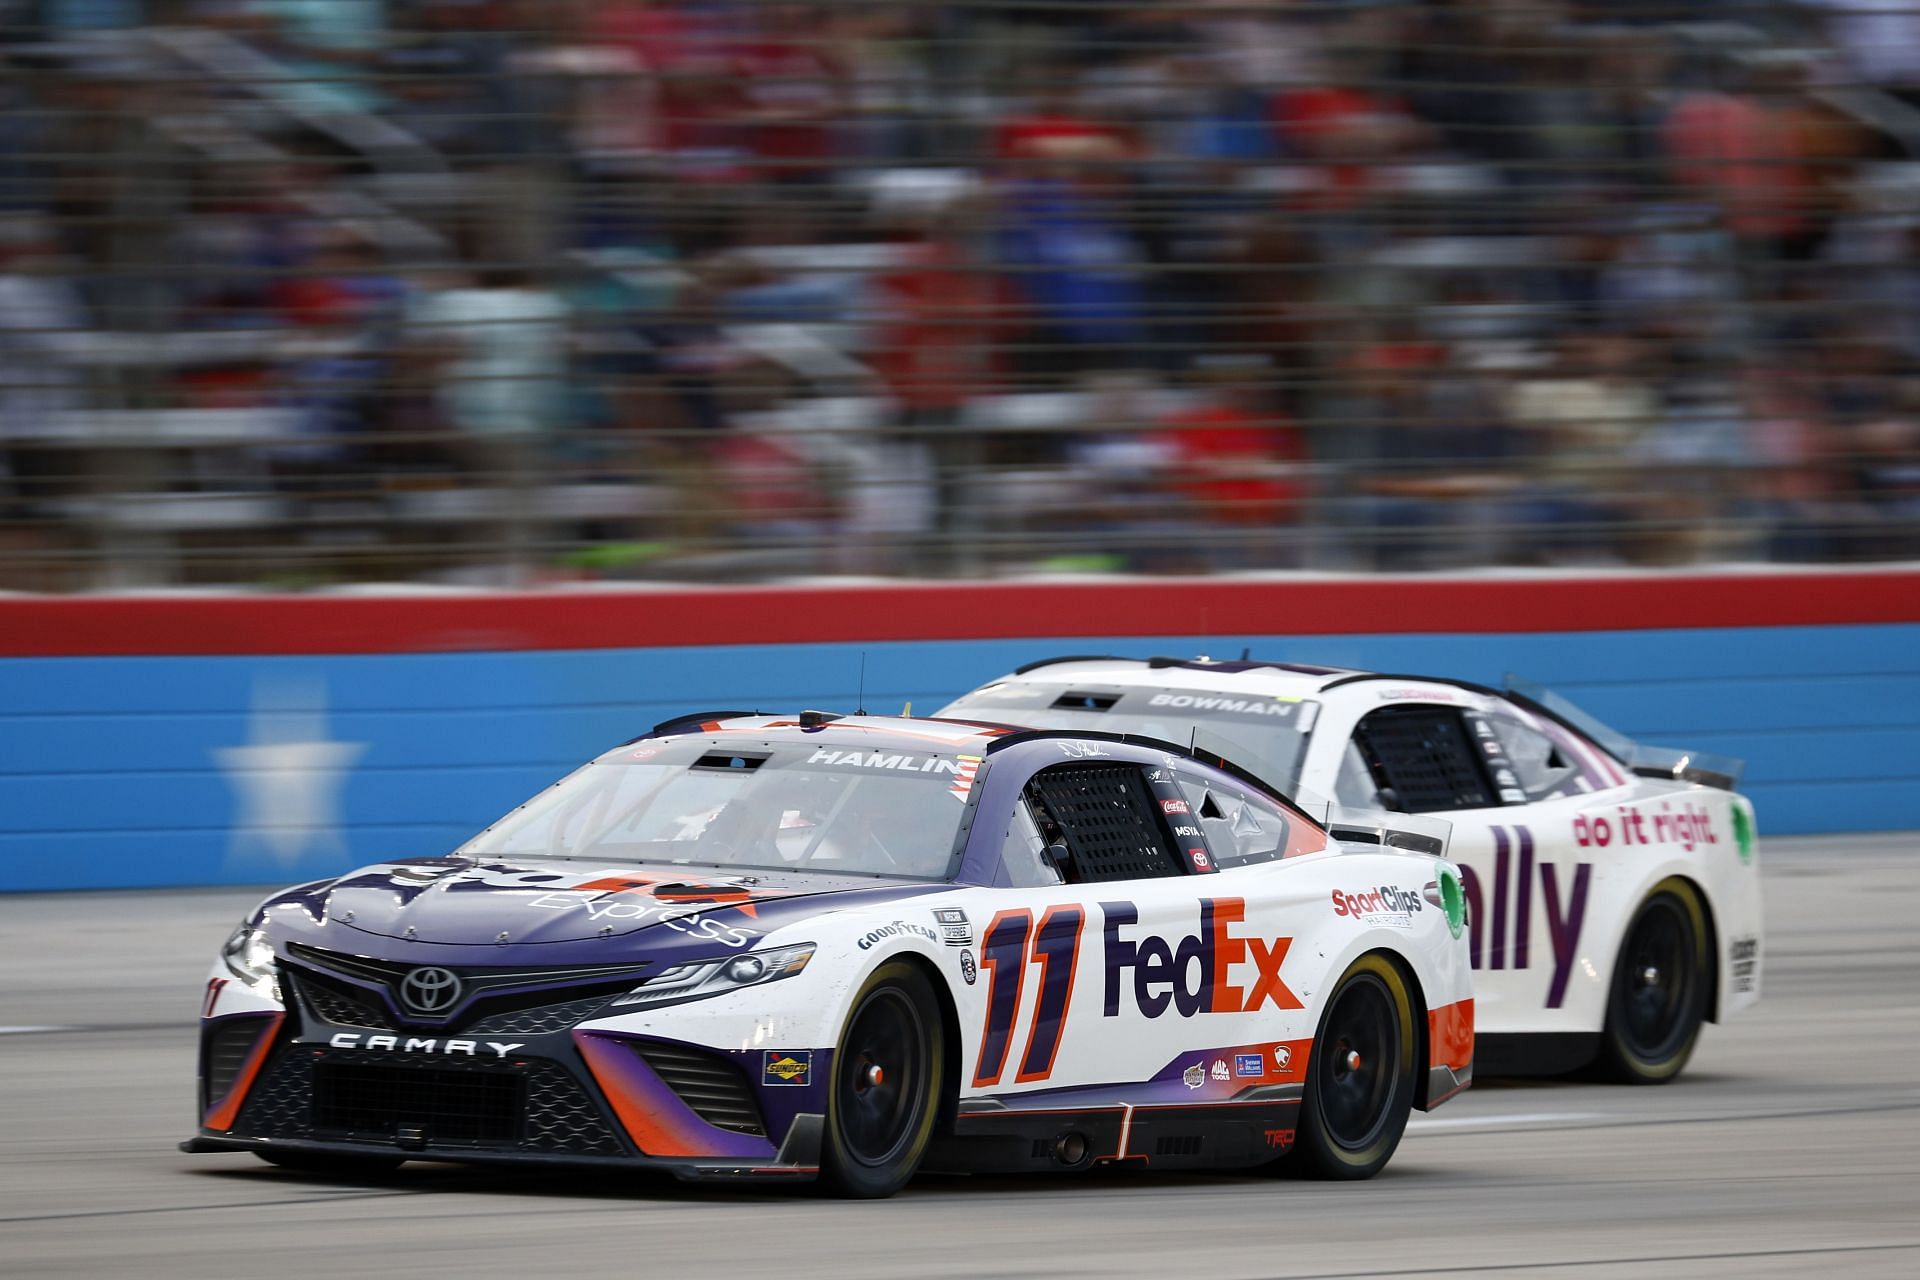 Denny Hamlin drives during the 2022 NASCAR Cup Series All-Star Race at Texas Motor Speedway in Fort Worth, Texas. (Photo by Jared C. Tilton/Getty Images)